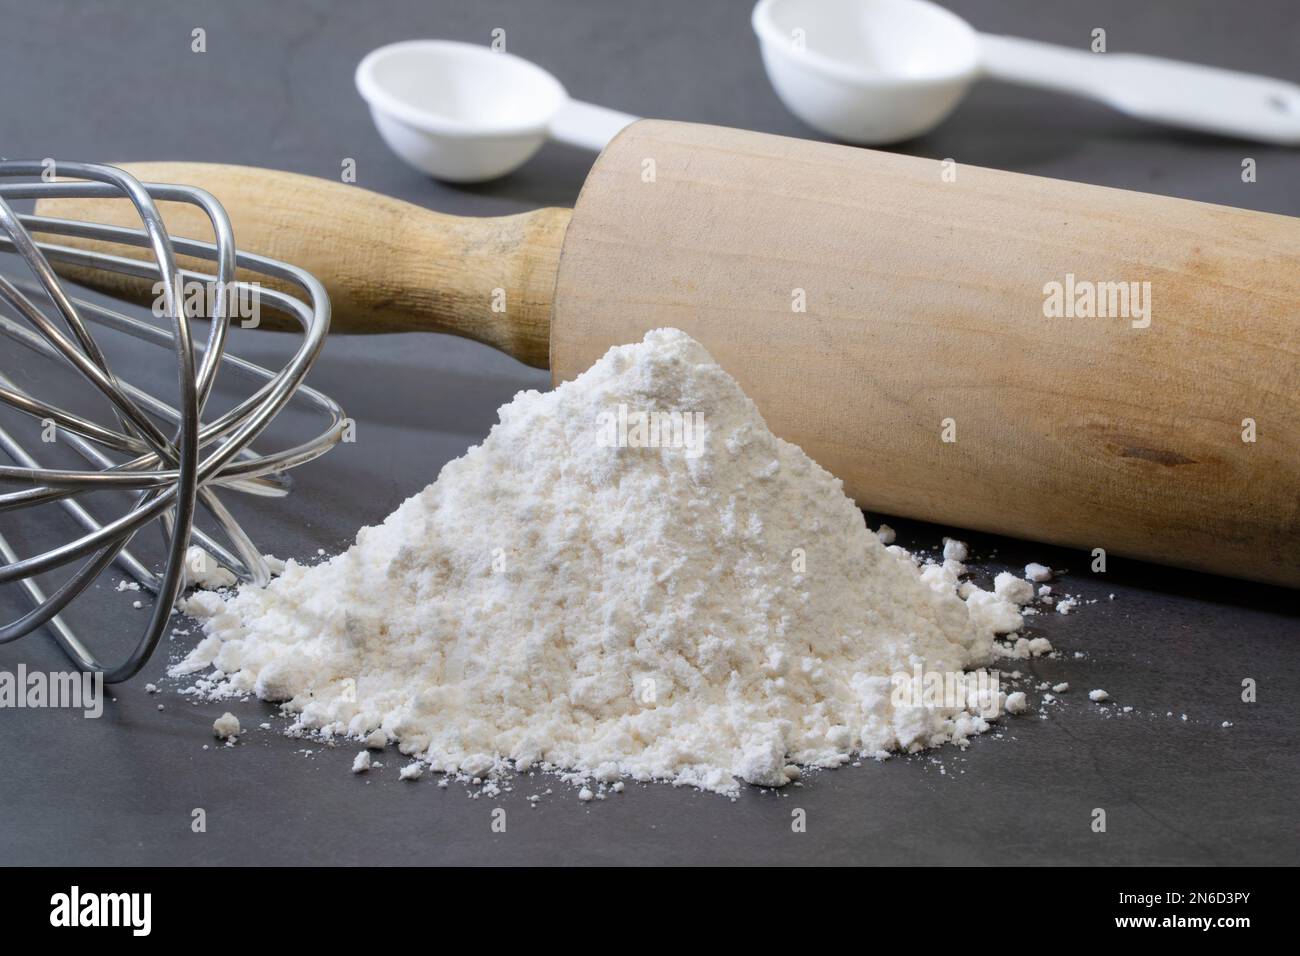 Pile of all-purpose flour for making homemade bread on dark background. Stock Photo